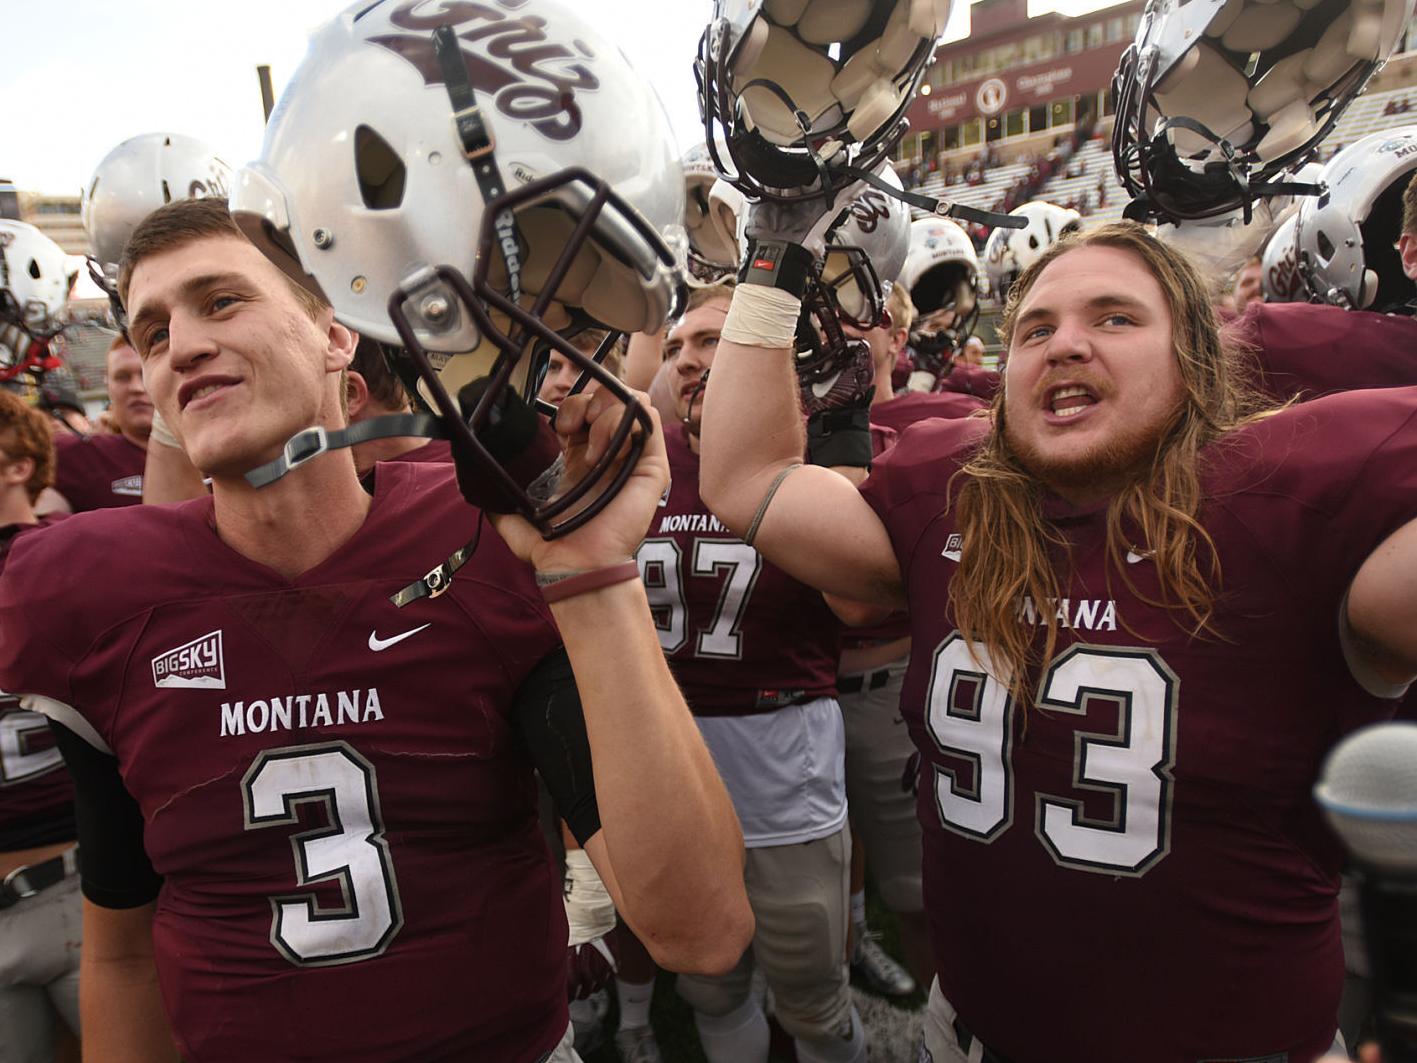 montana grizzlies copper and gold